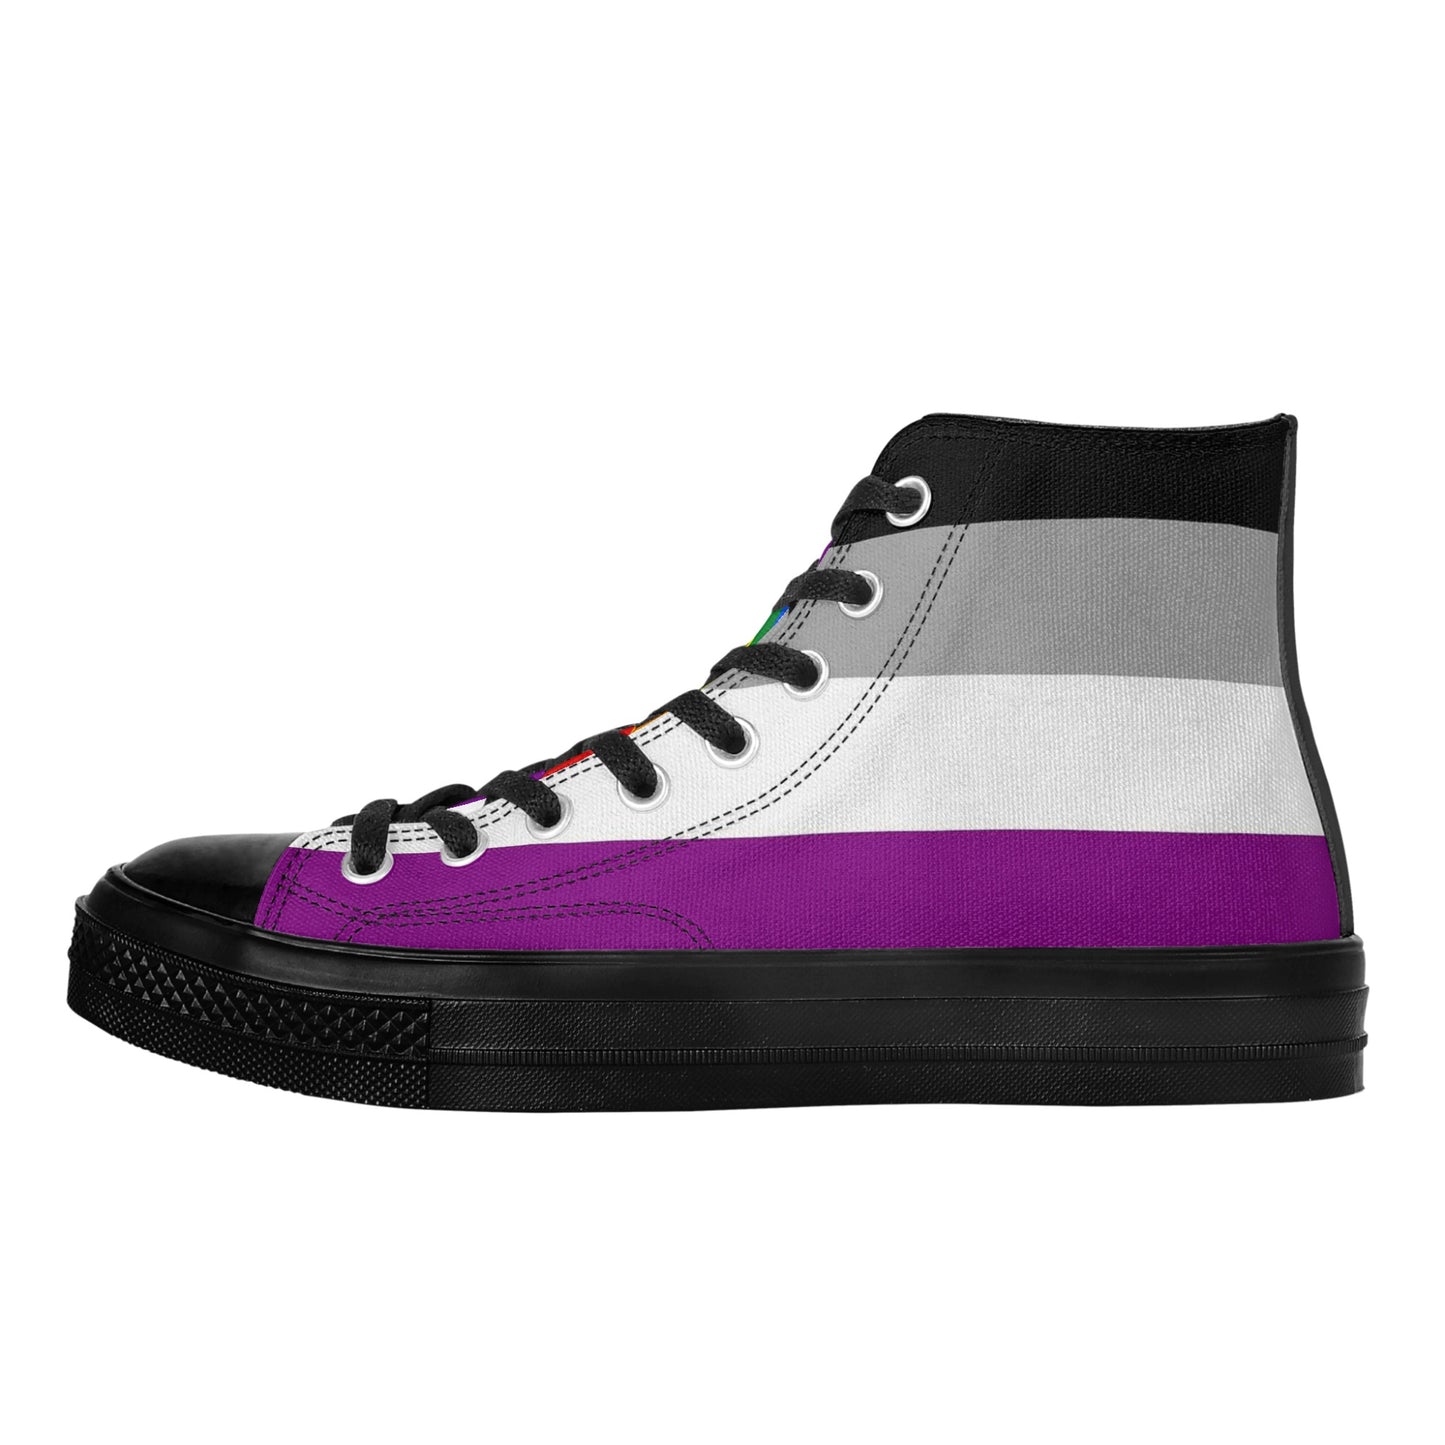 Asexual Pride Collection - Mens Classic Black High Top Canvas Shoes for the LGBTQIA+ community